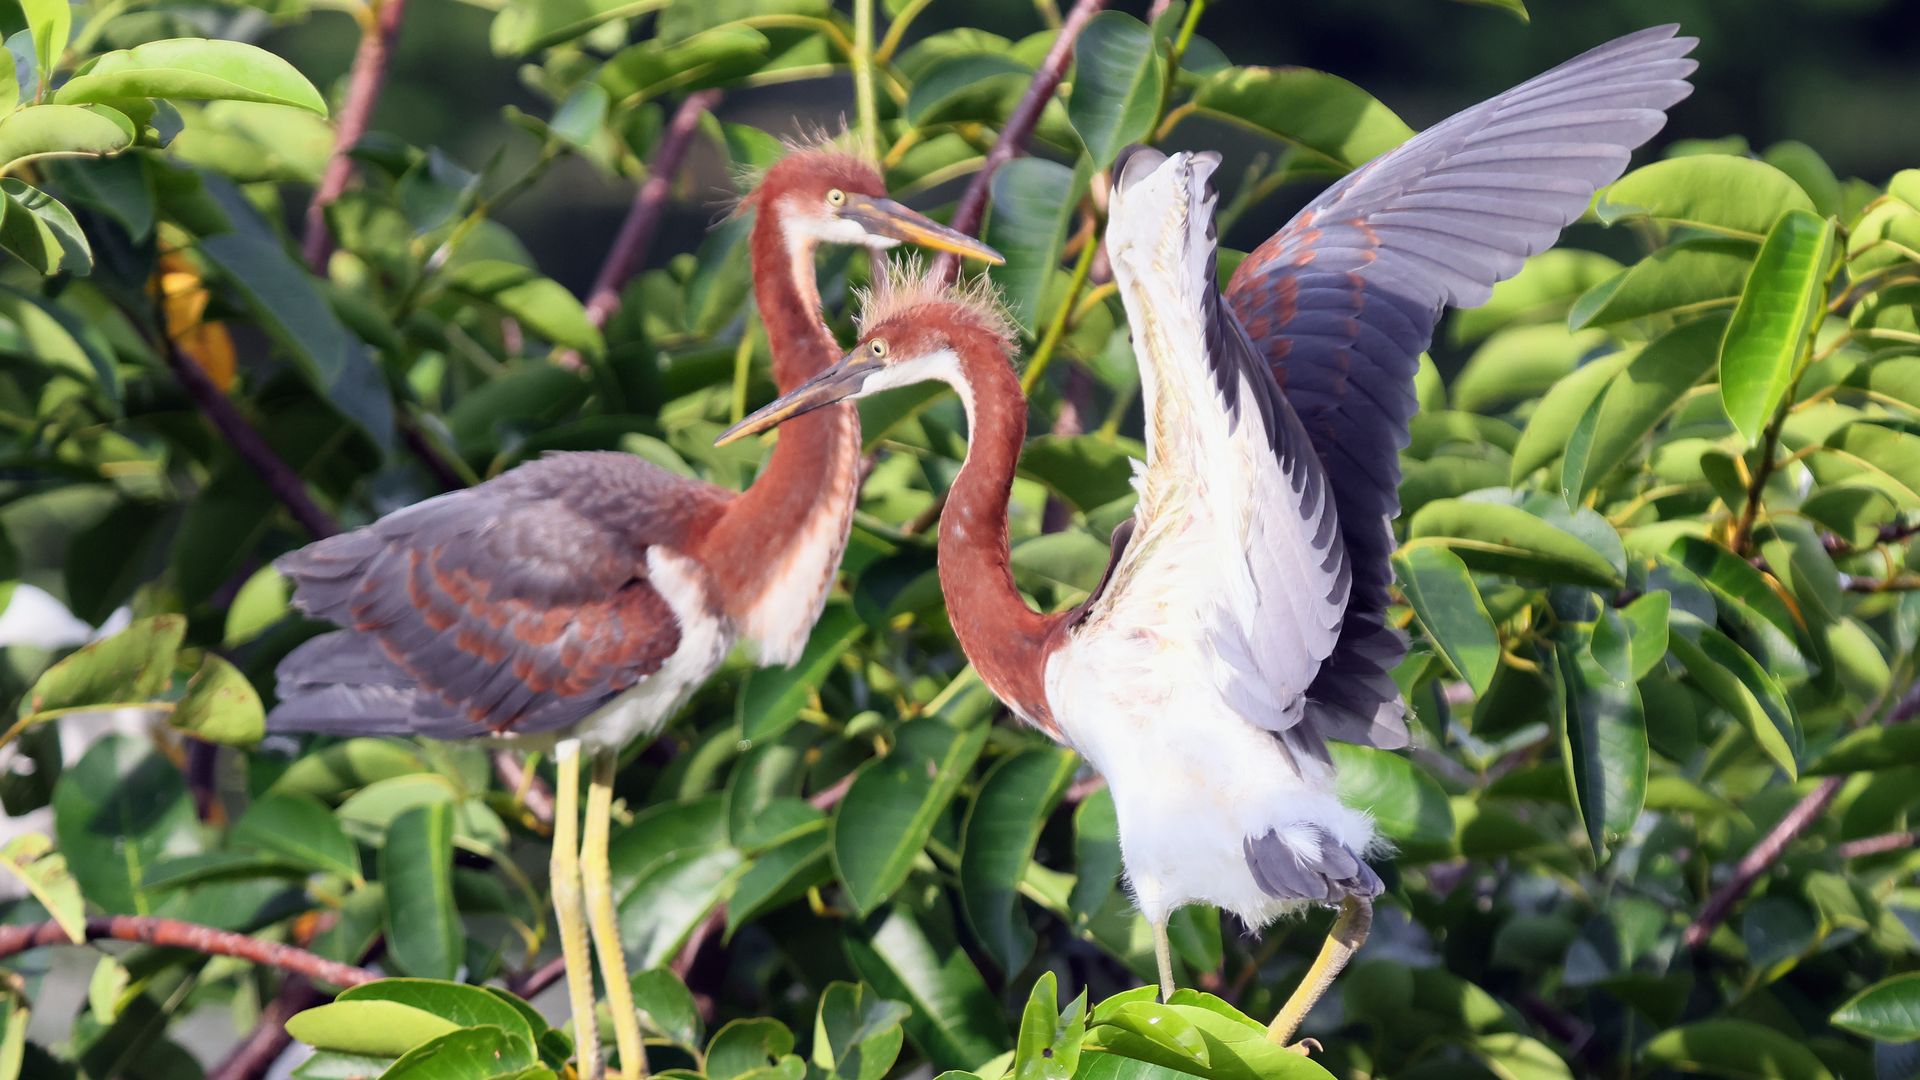 Two tricolored heron sit in a tree at the Wakodahatchee Wetlands on May 13, 2021 in Delray Beach, Florida.